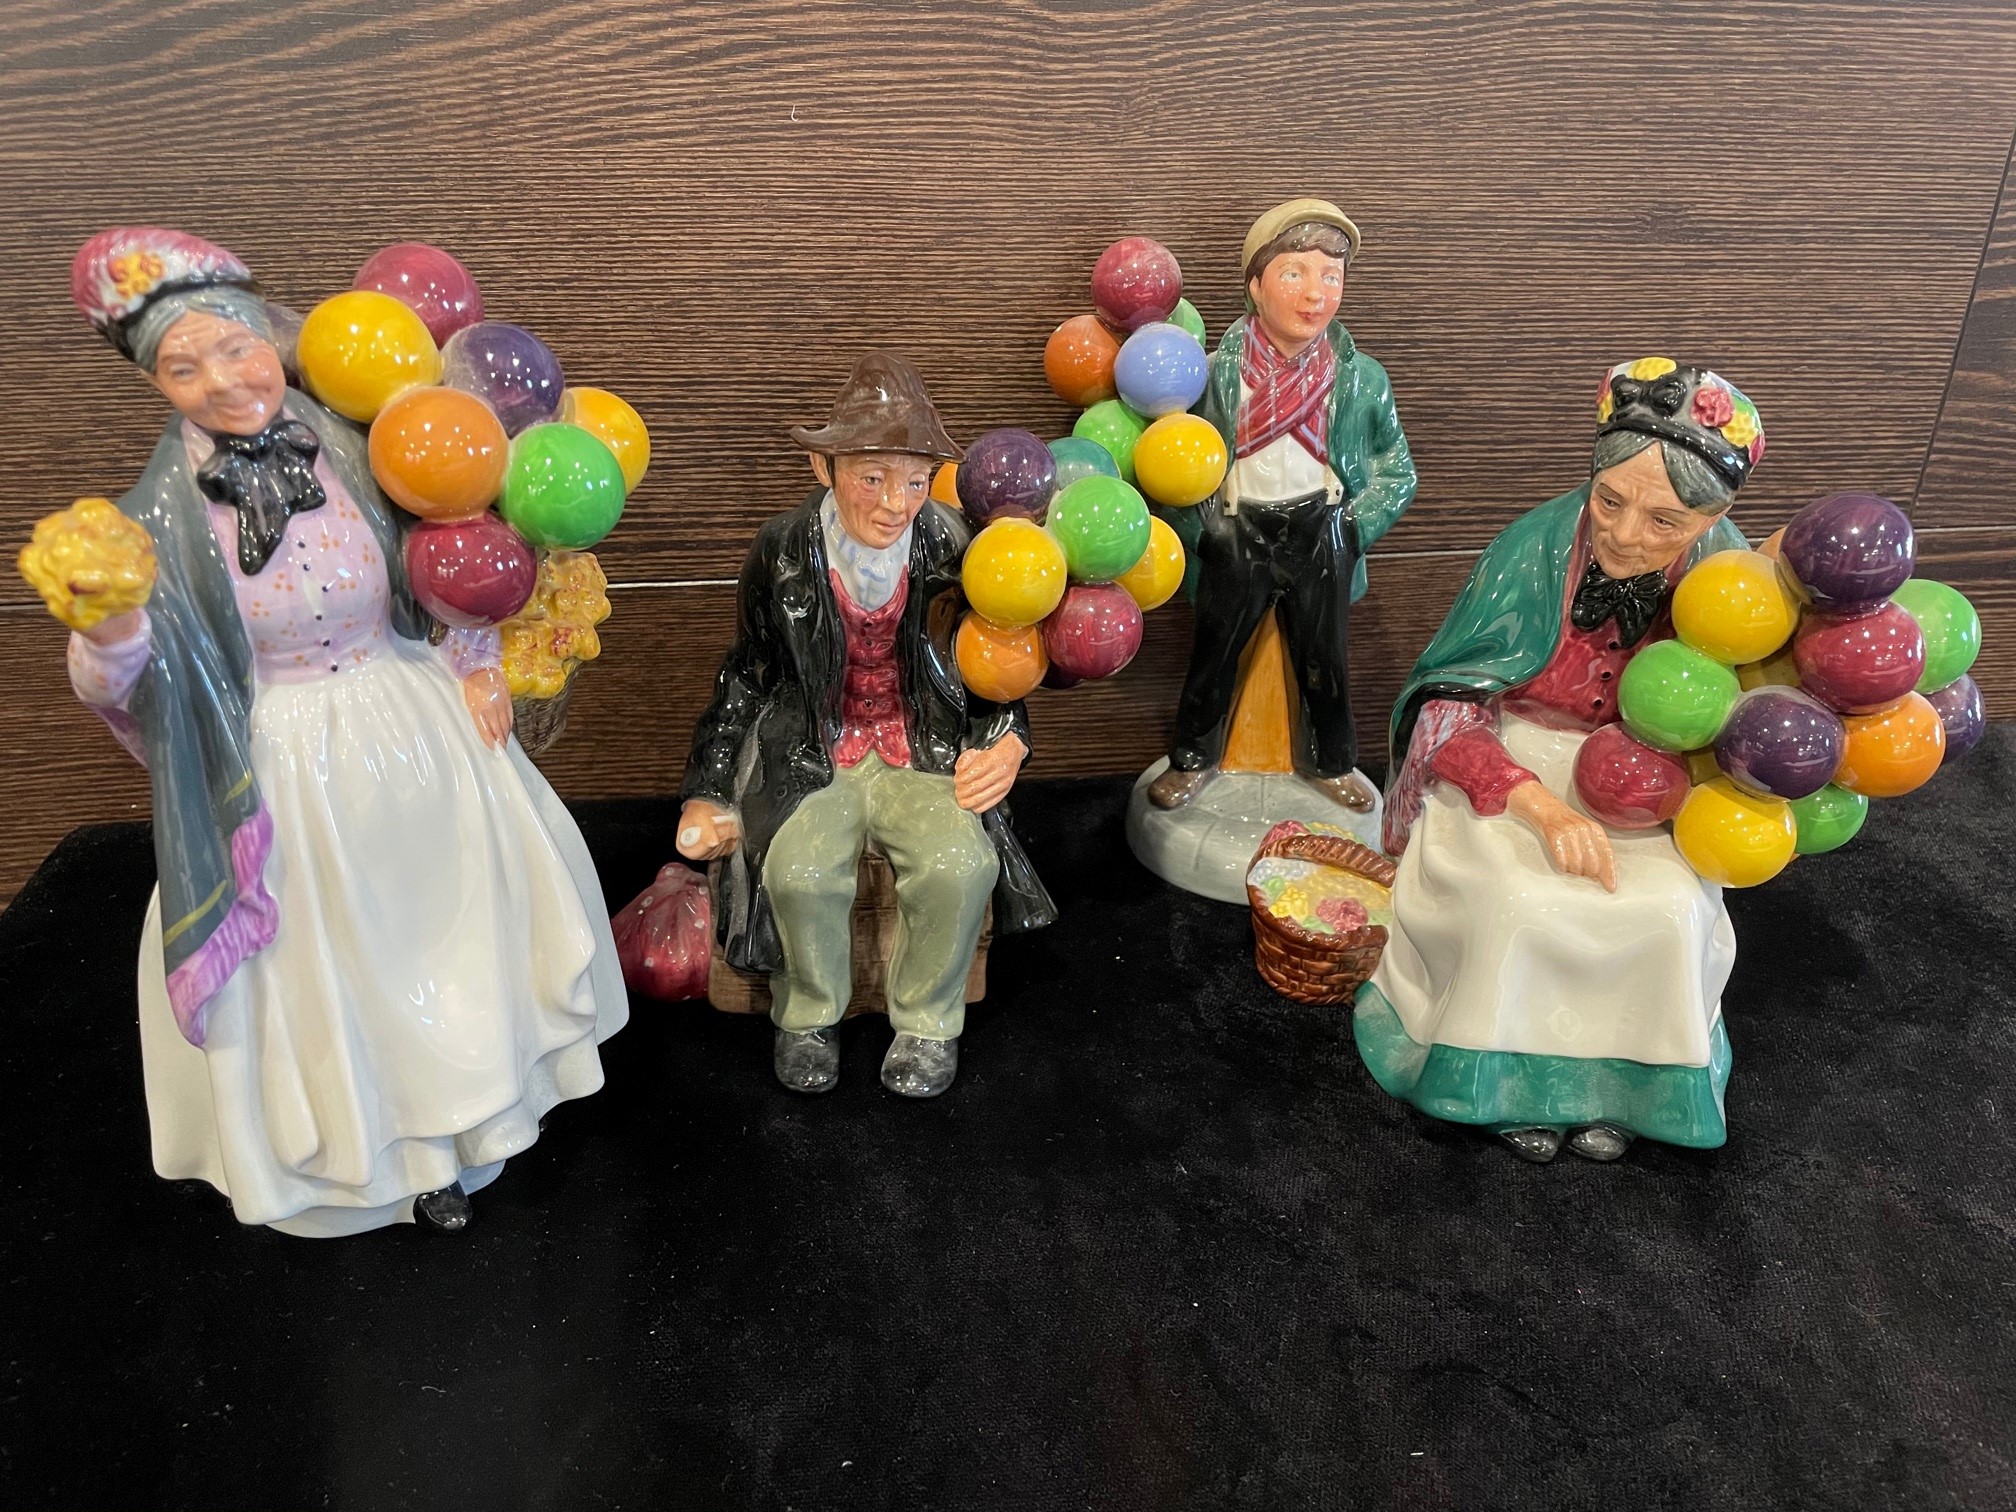 A ROYAL DOULTON FIGURE OF 'THE BALLOON MAN' AND FOUR OTHERS